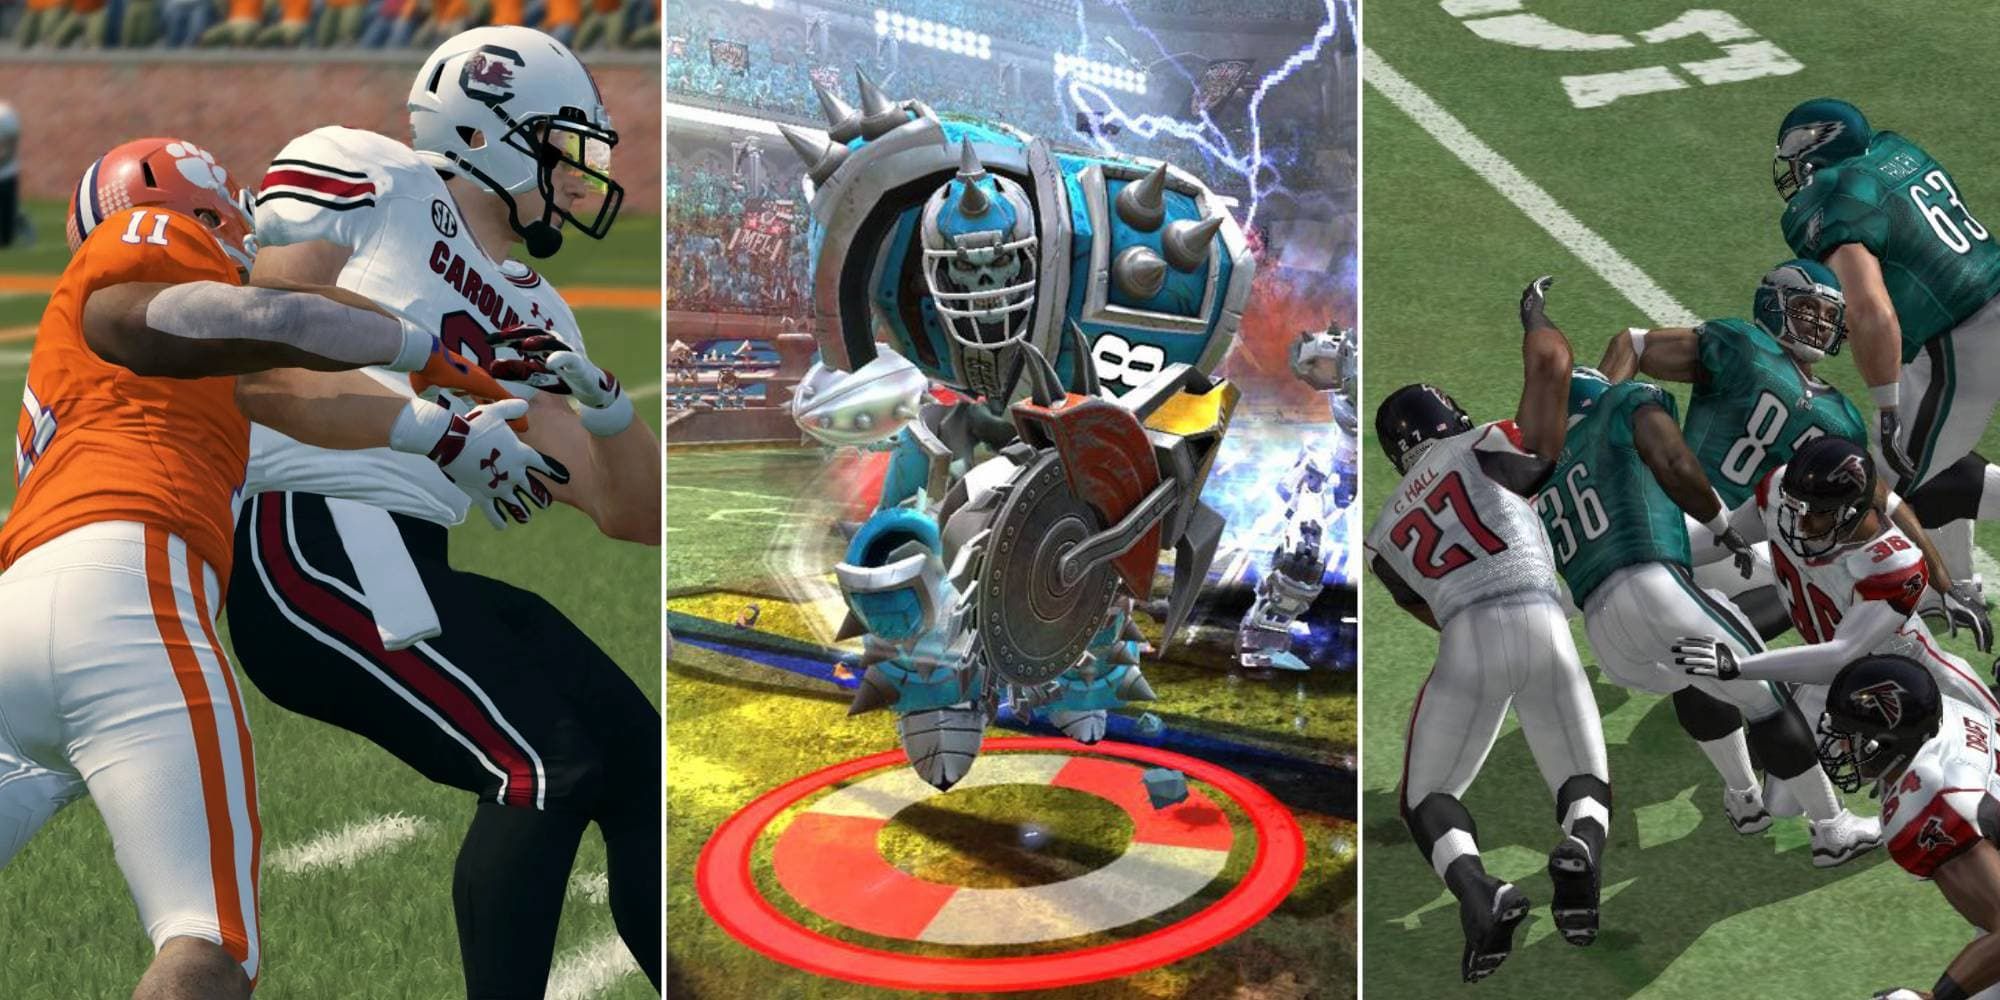 A player tackles the quarterback in NCAA Football 14, a Mutant scores a touchdown in Mutant Football League, and several players collide in Madden 2005.